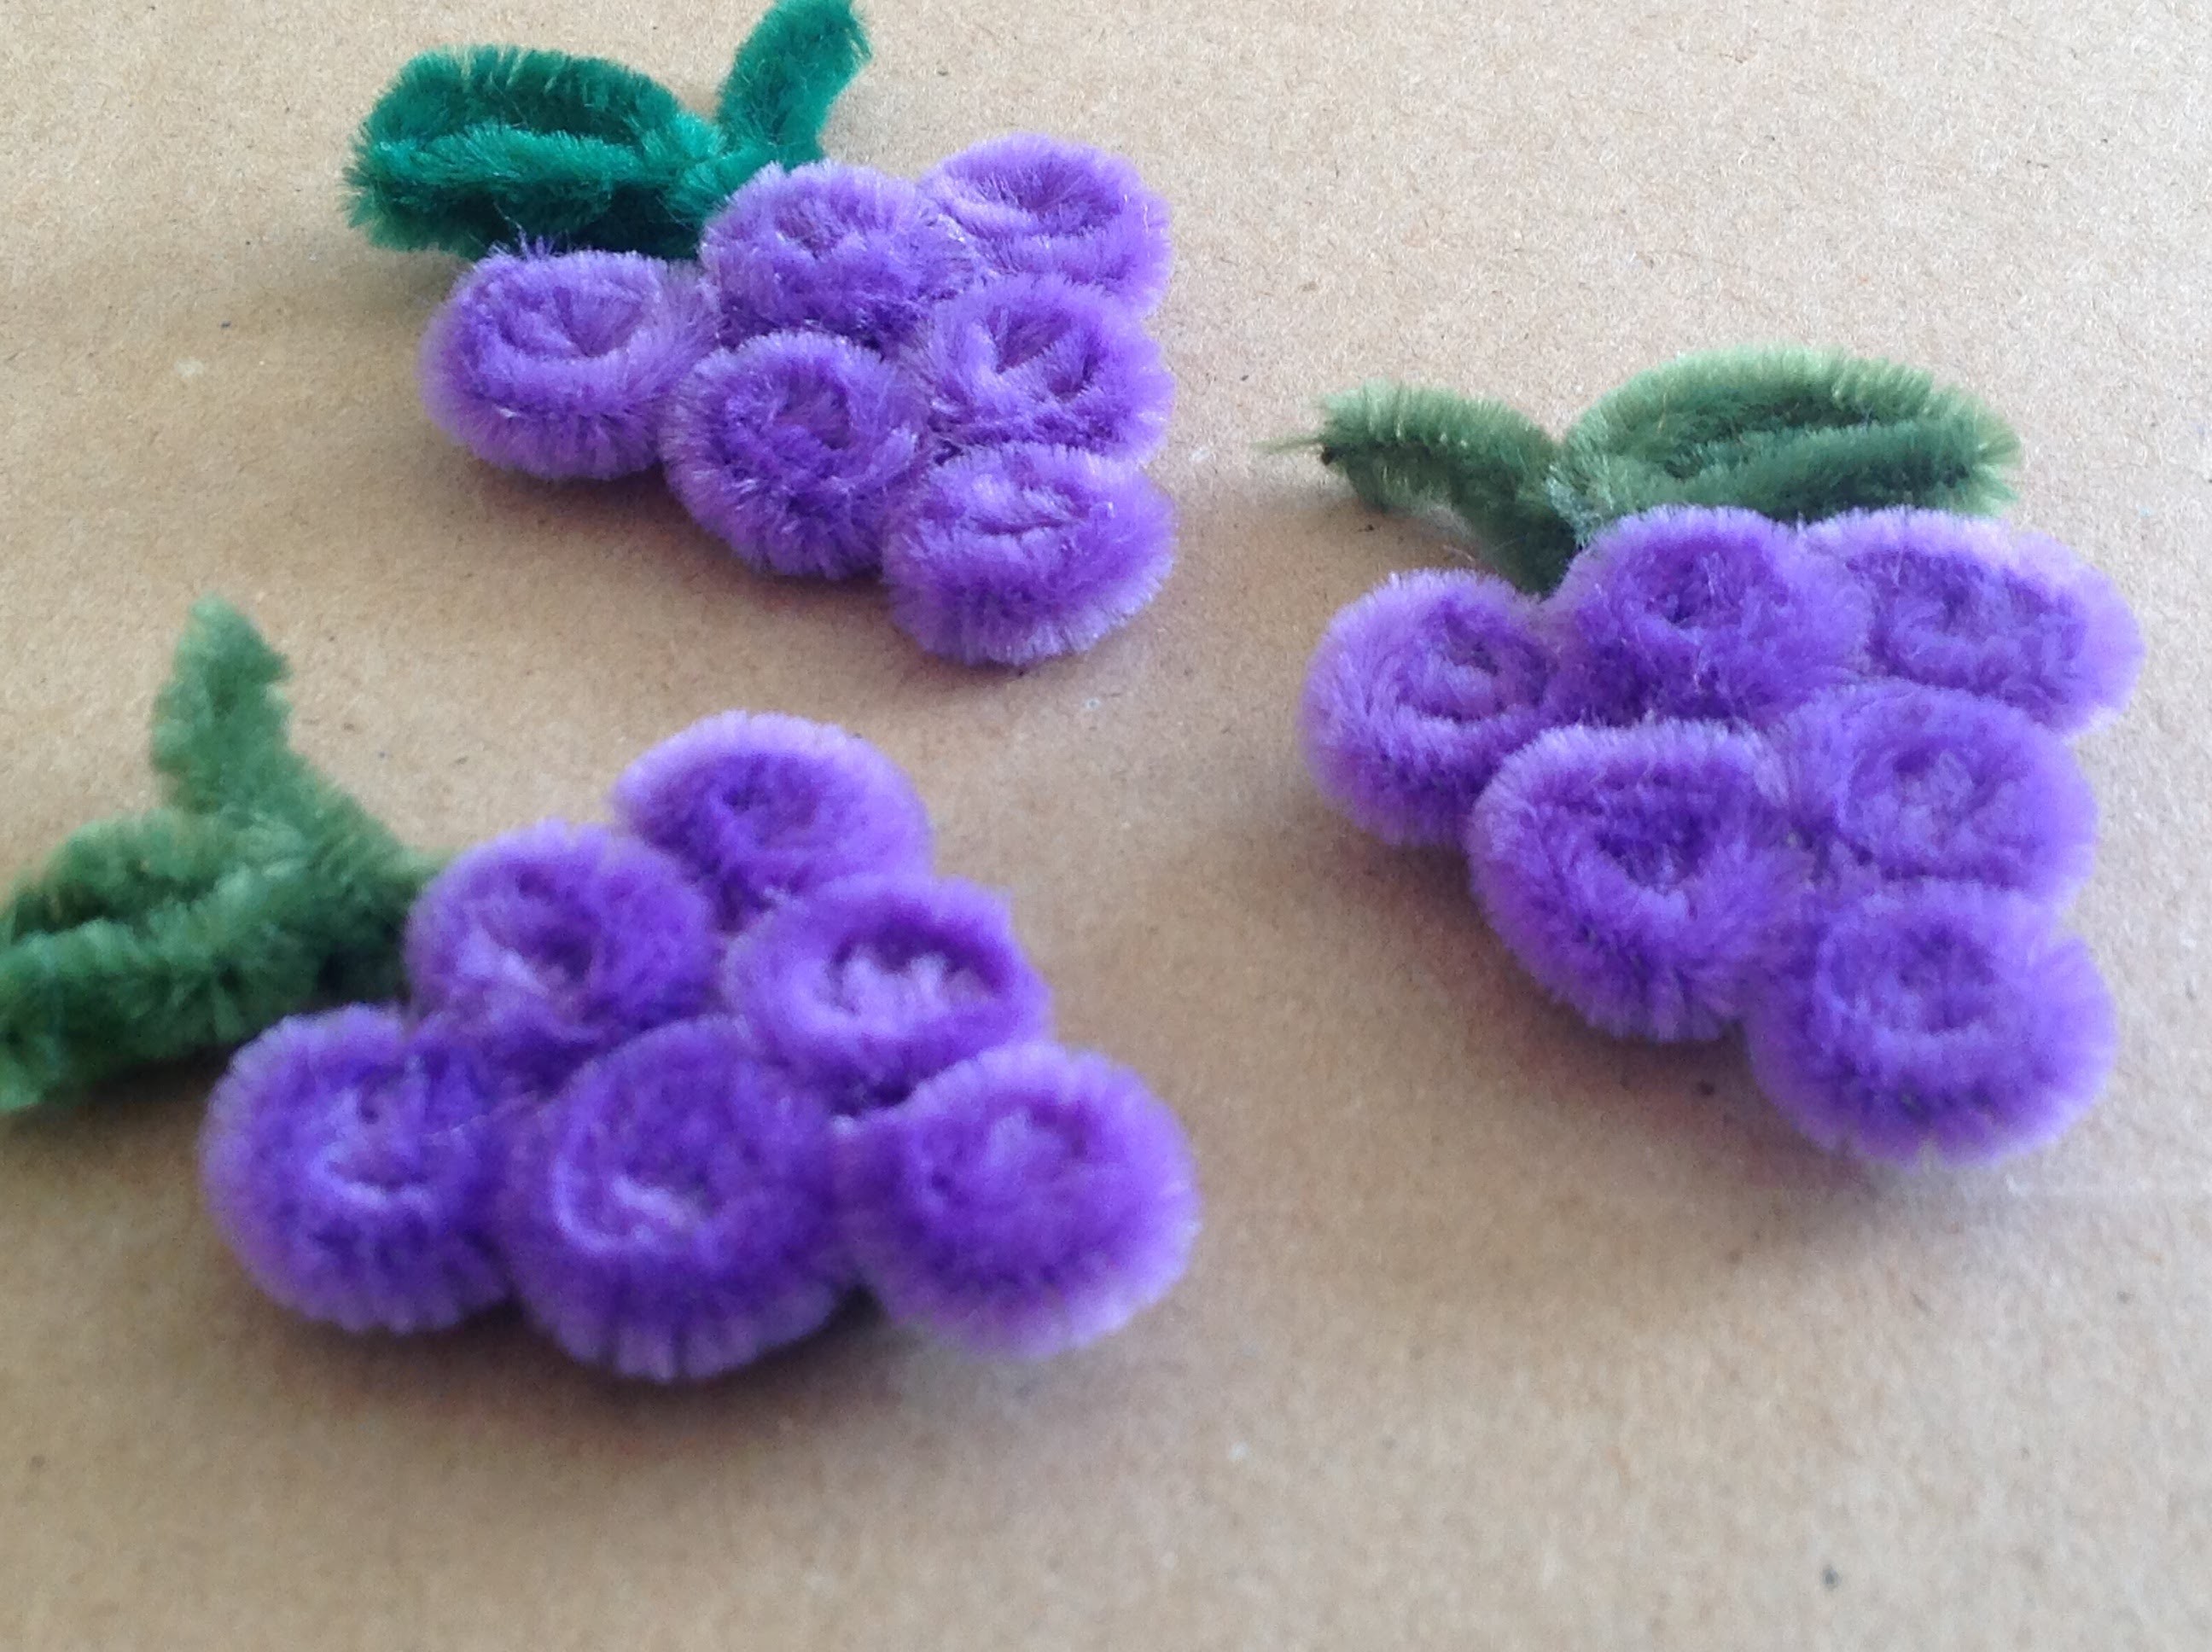 UVAS HECHAS CON LIMPIA PIPAS .- PIPE CLEANER GRAPES .